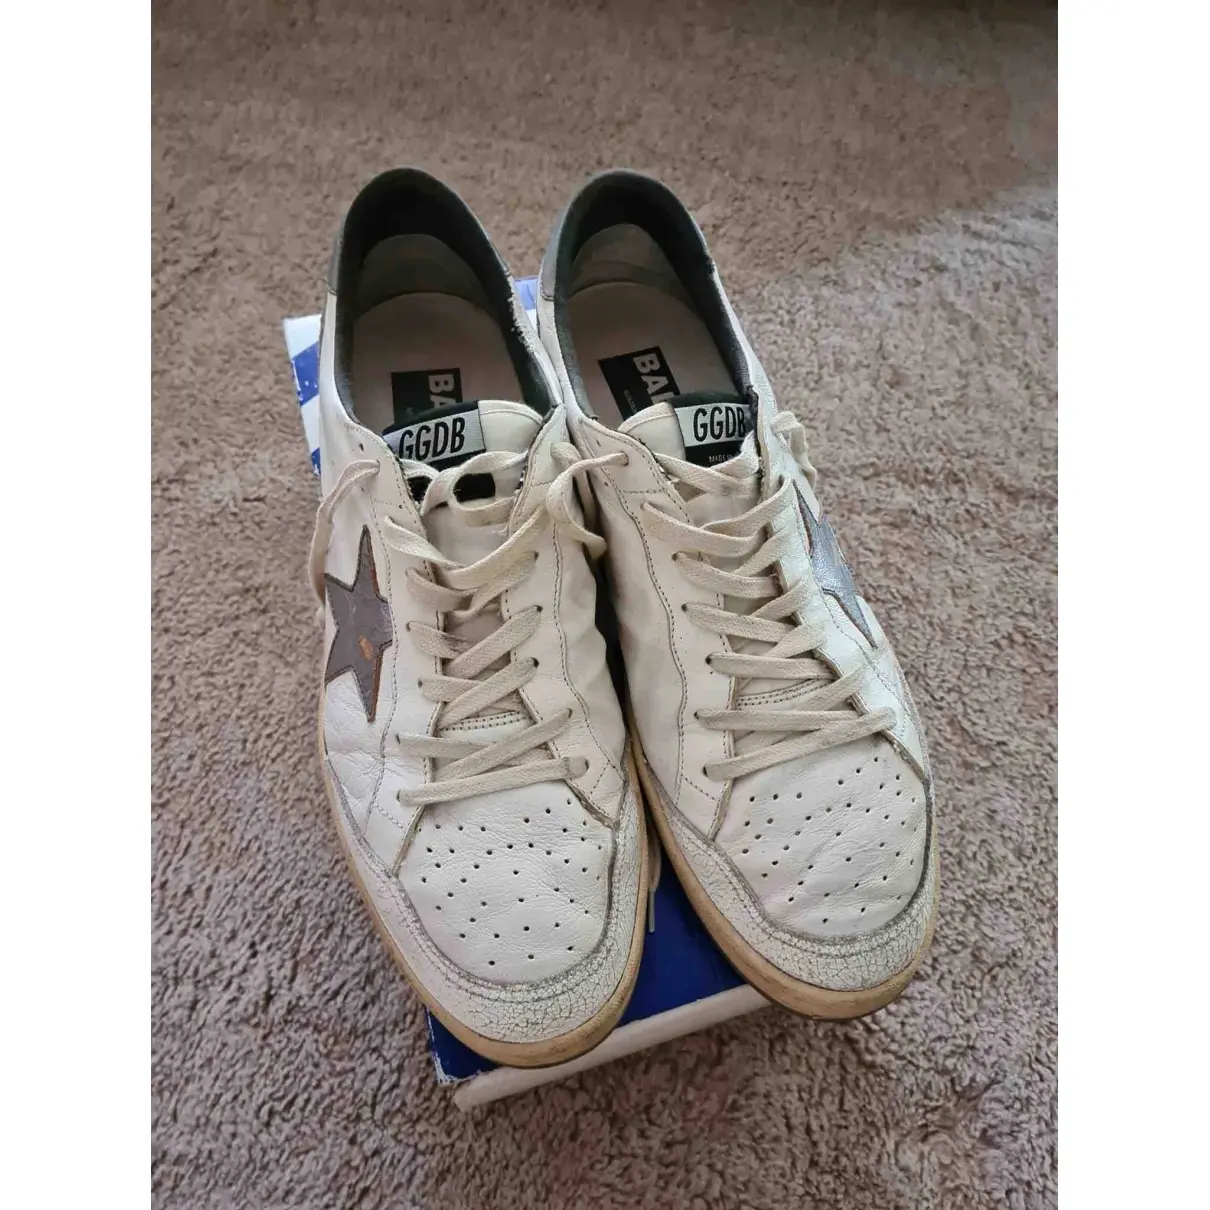 Buy Golden Goose Ball Star leather low trainers online